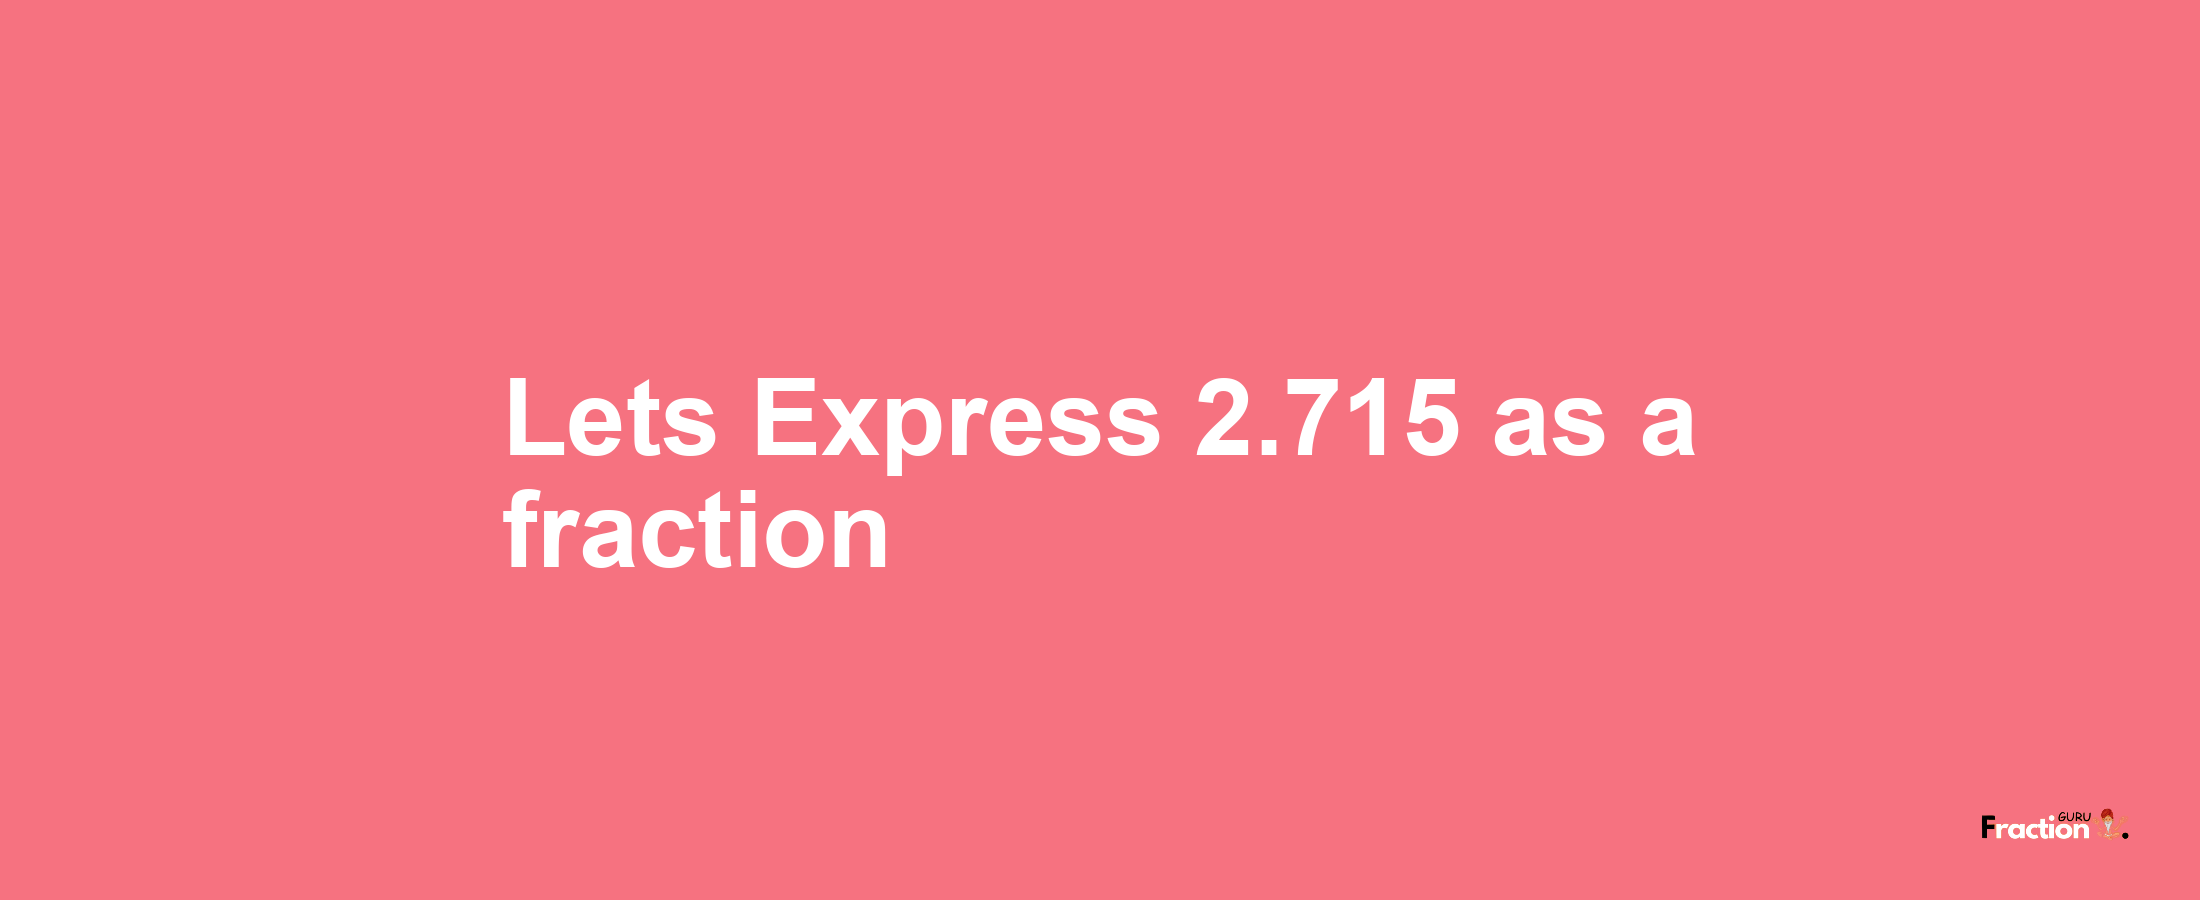 Lets Express 2.715 as afraction